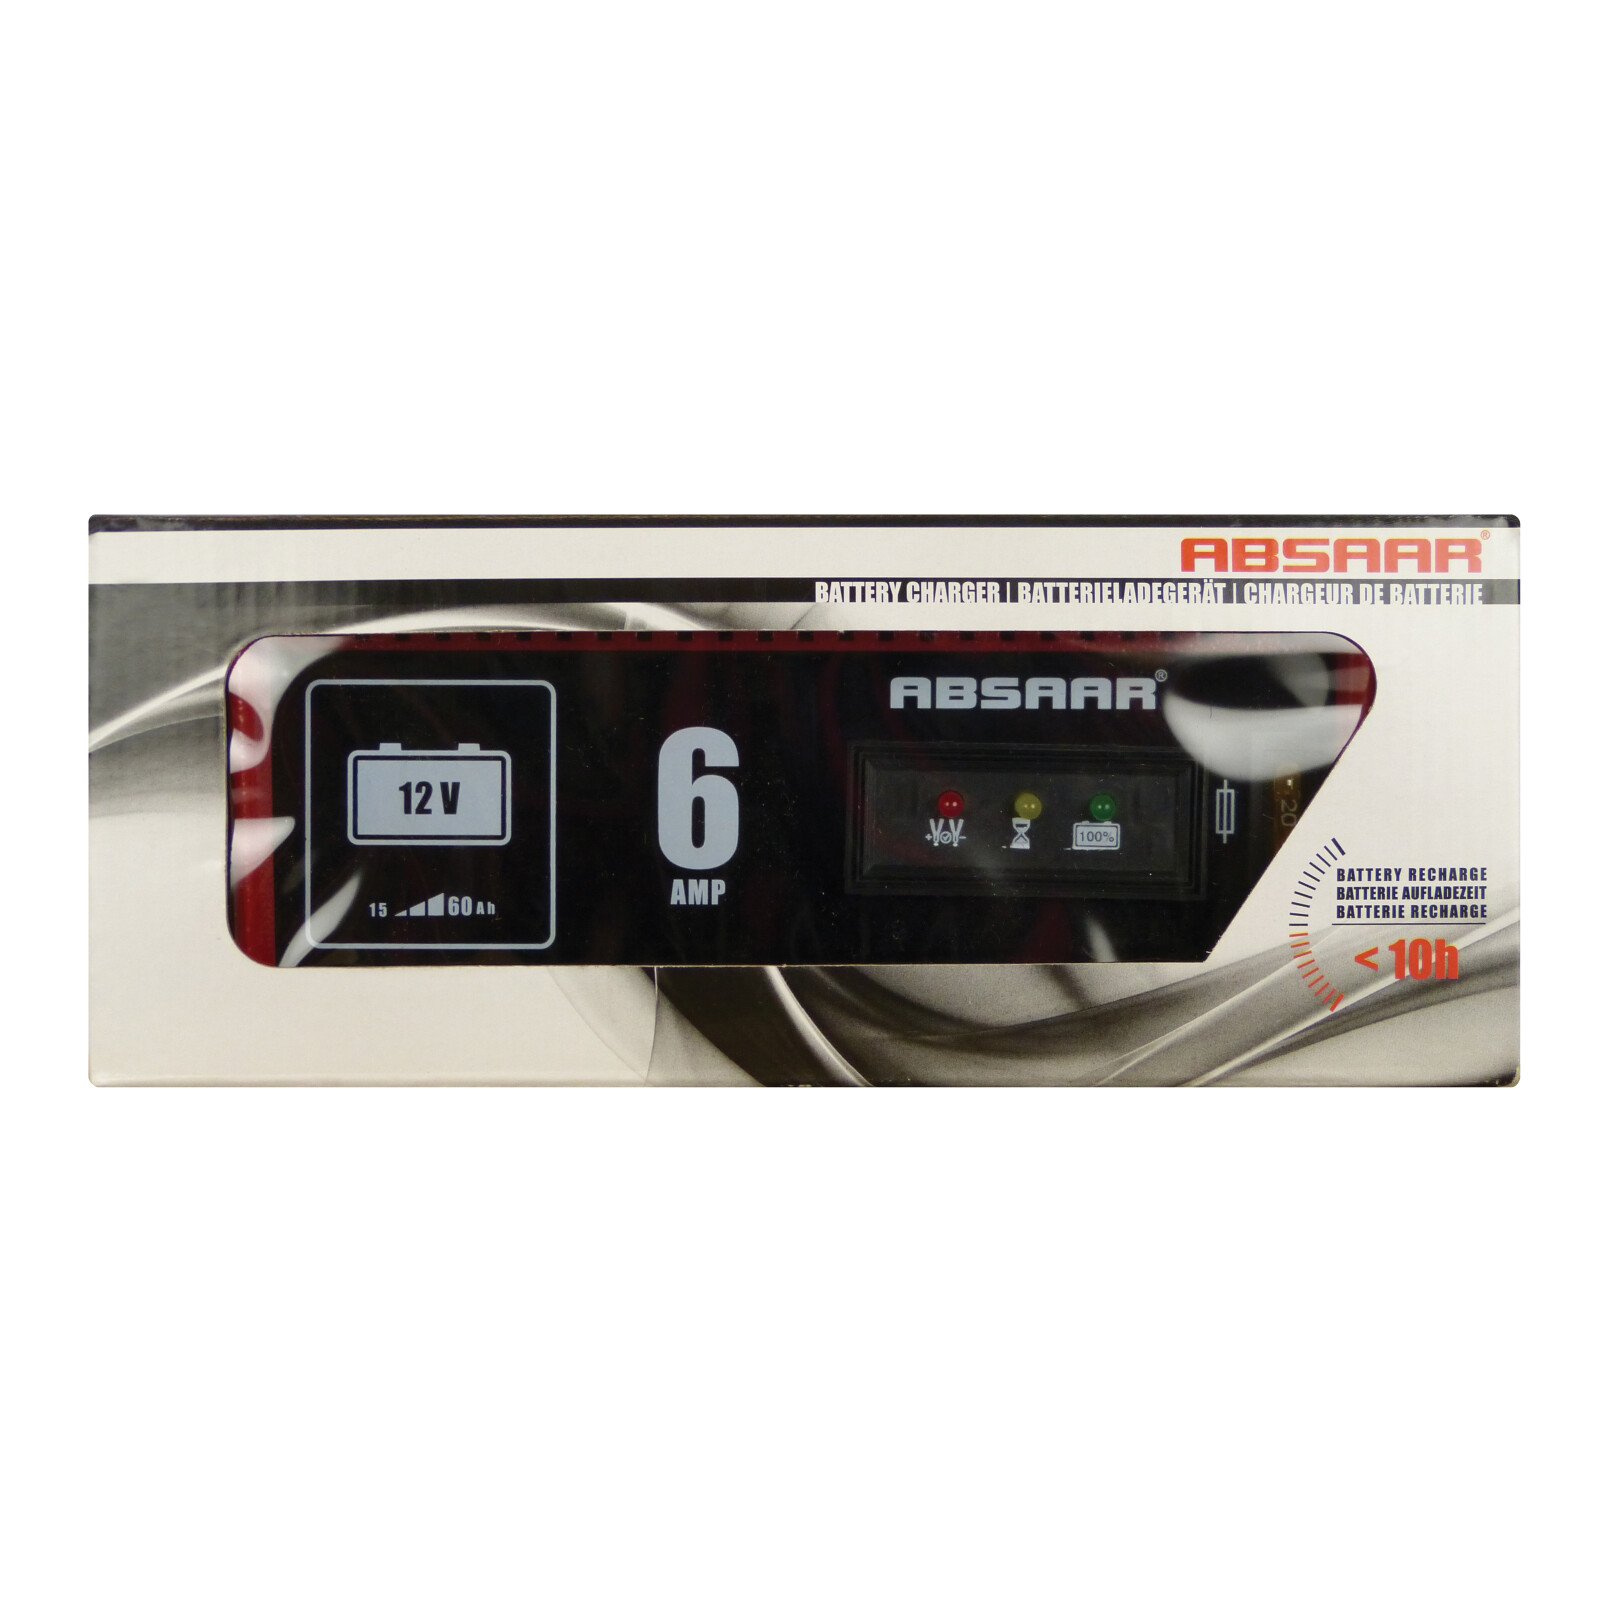 Absaar battery charger 6A - 12V thumb